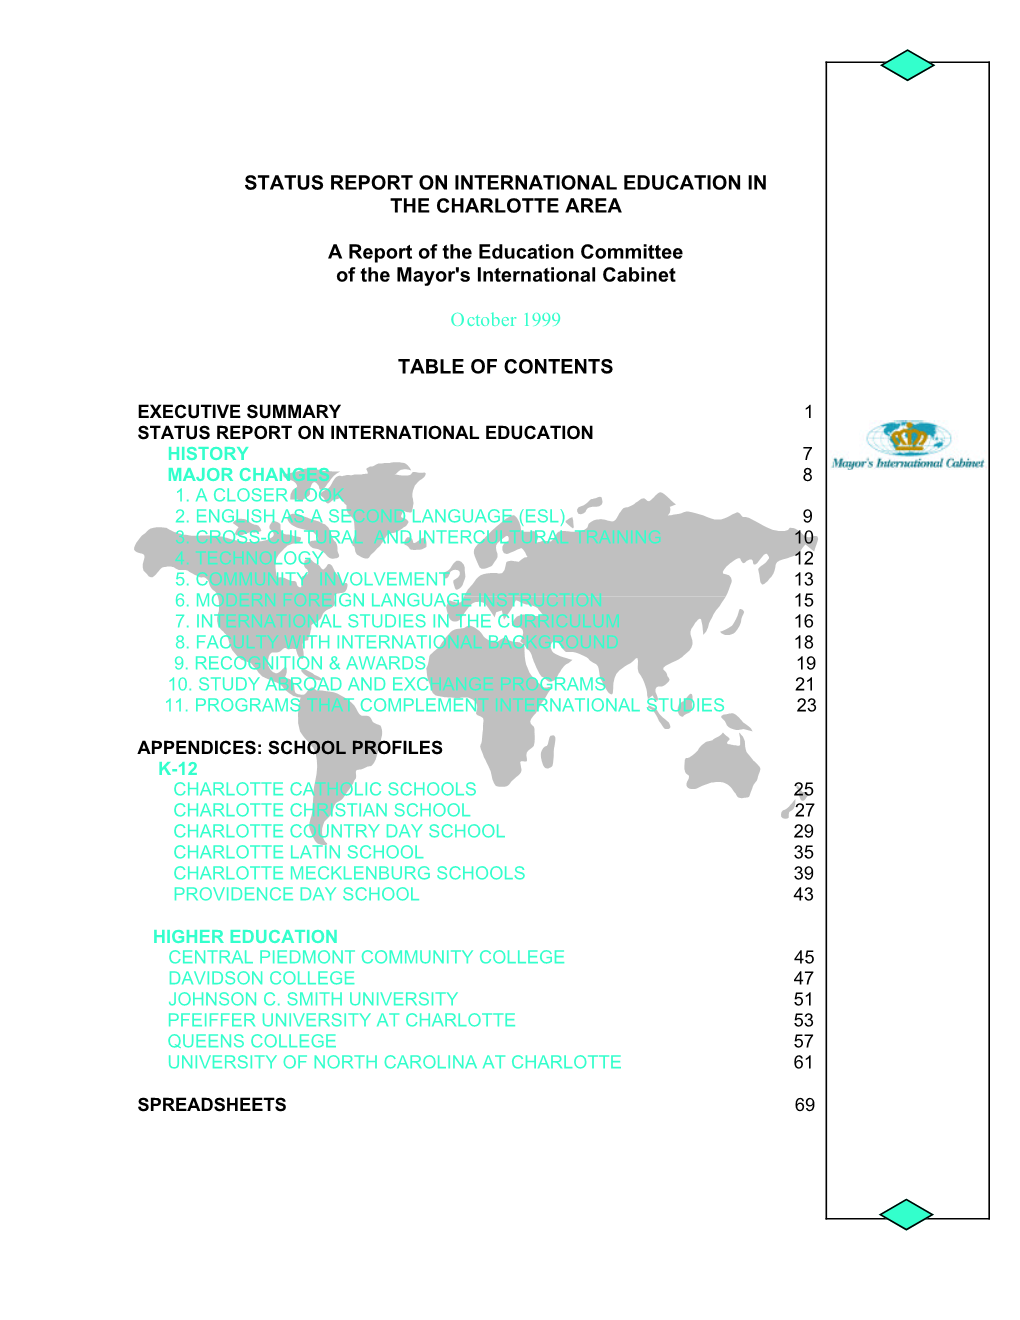 Status Report on International Education in the Charlotte Area